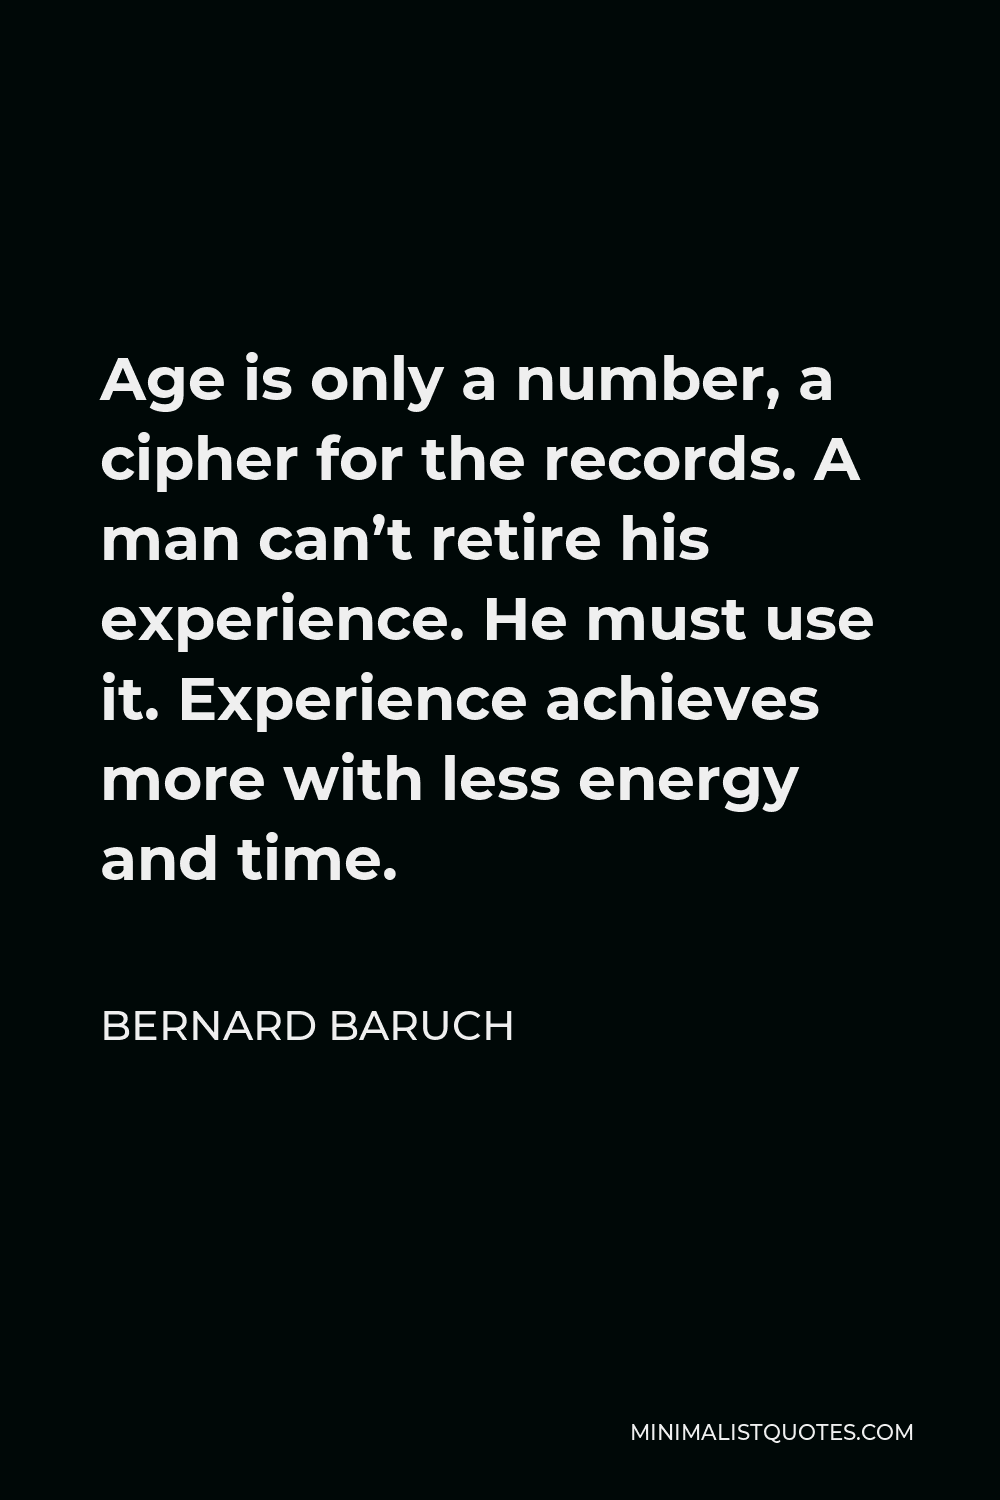 Bernard Baruch Quote - Age is only a number, a cipher for the records. A man can’t retire his experience. He must use it. Experience achieves more with less energy and time.